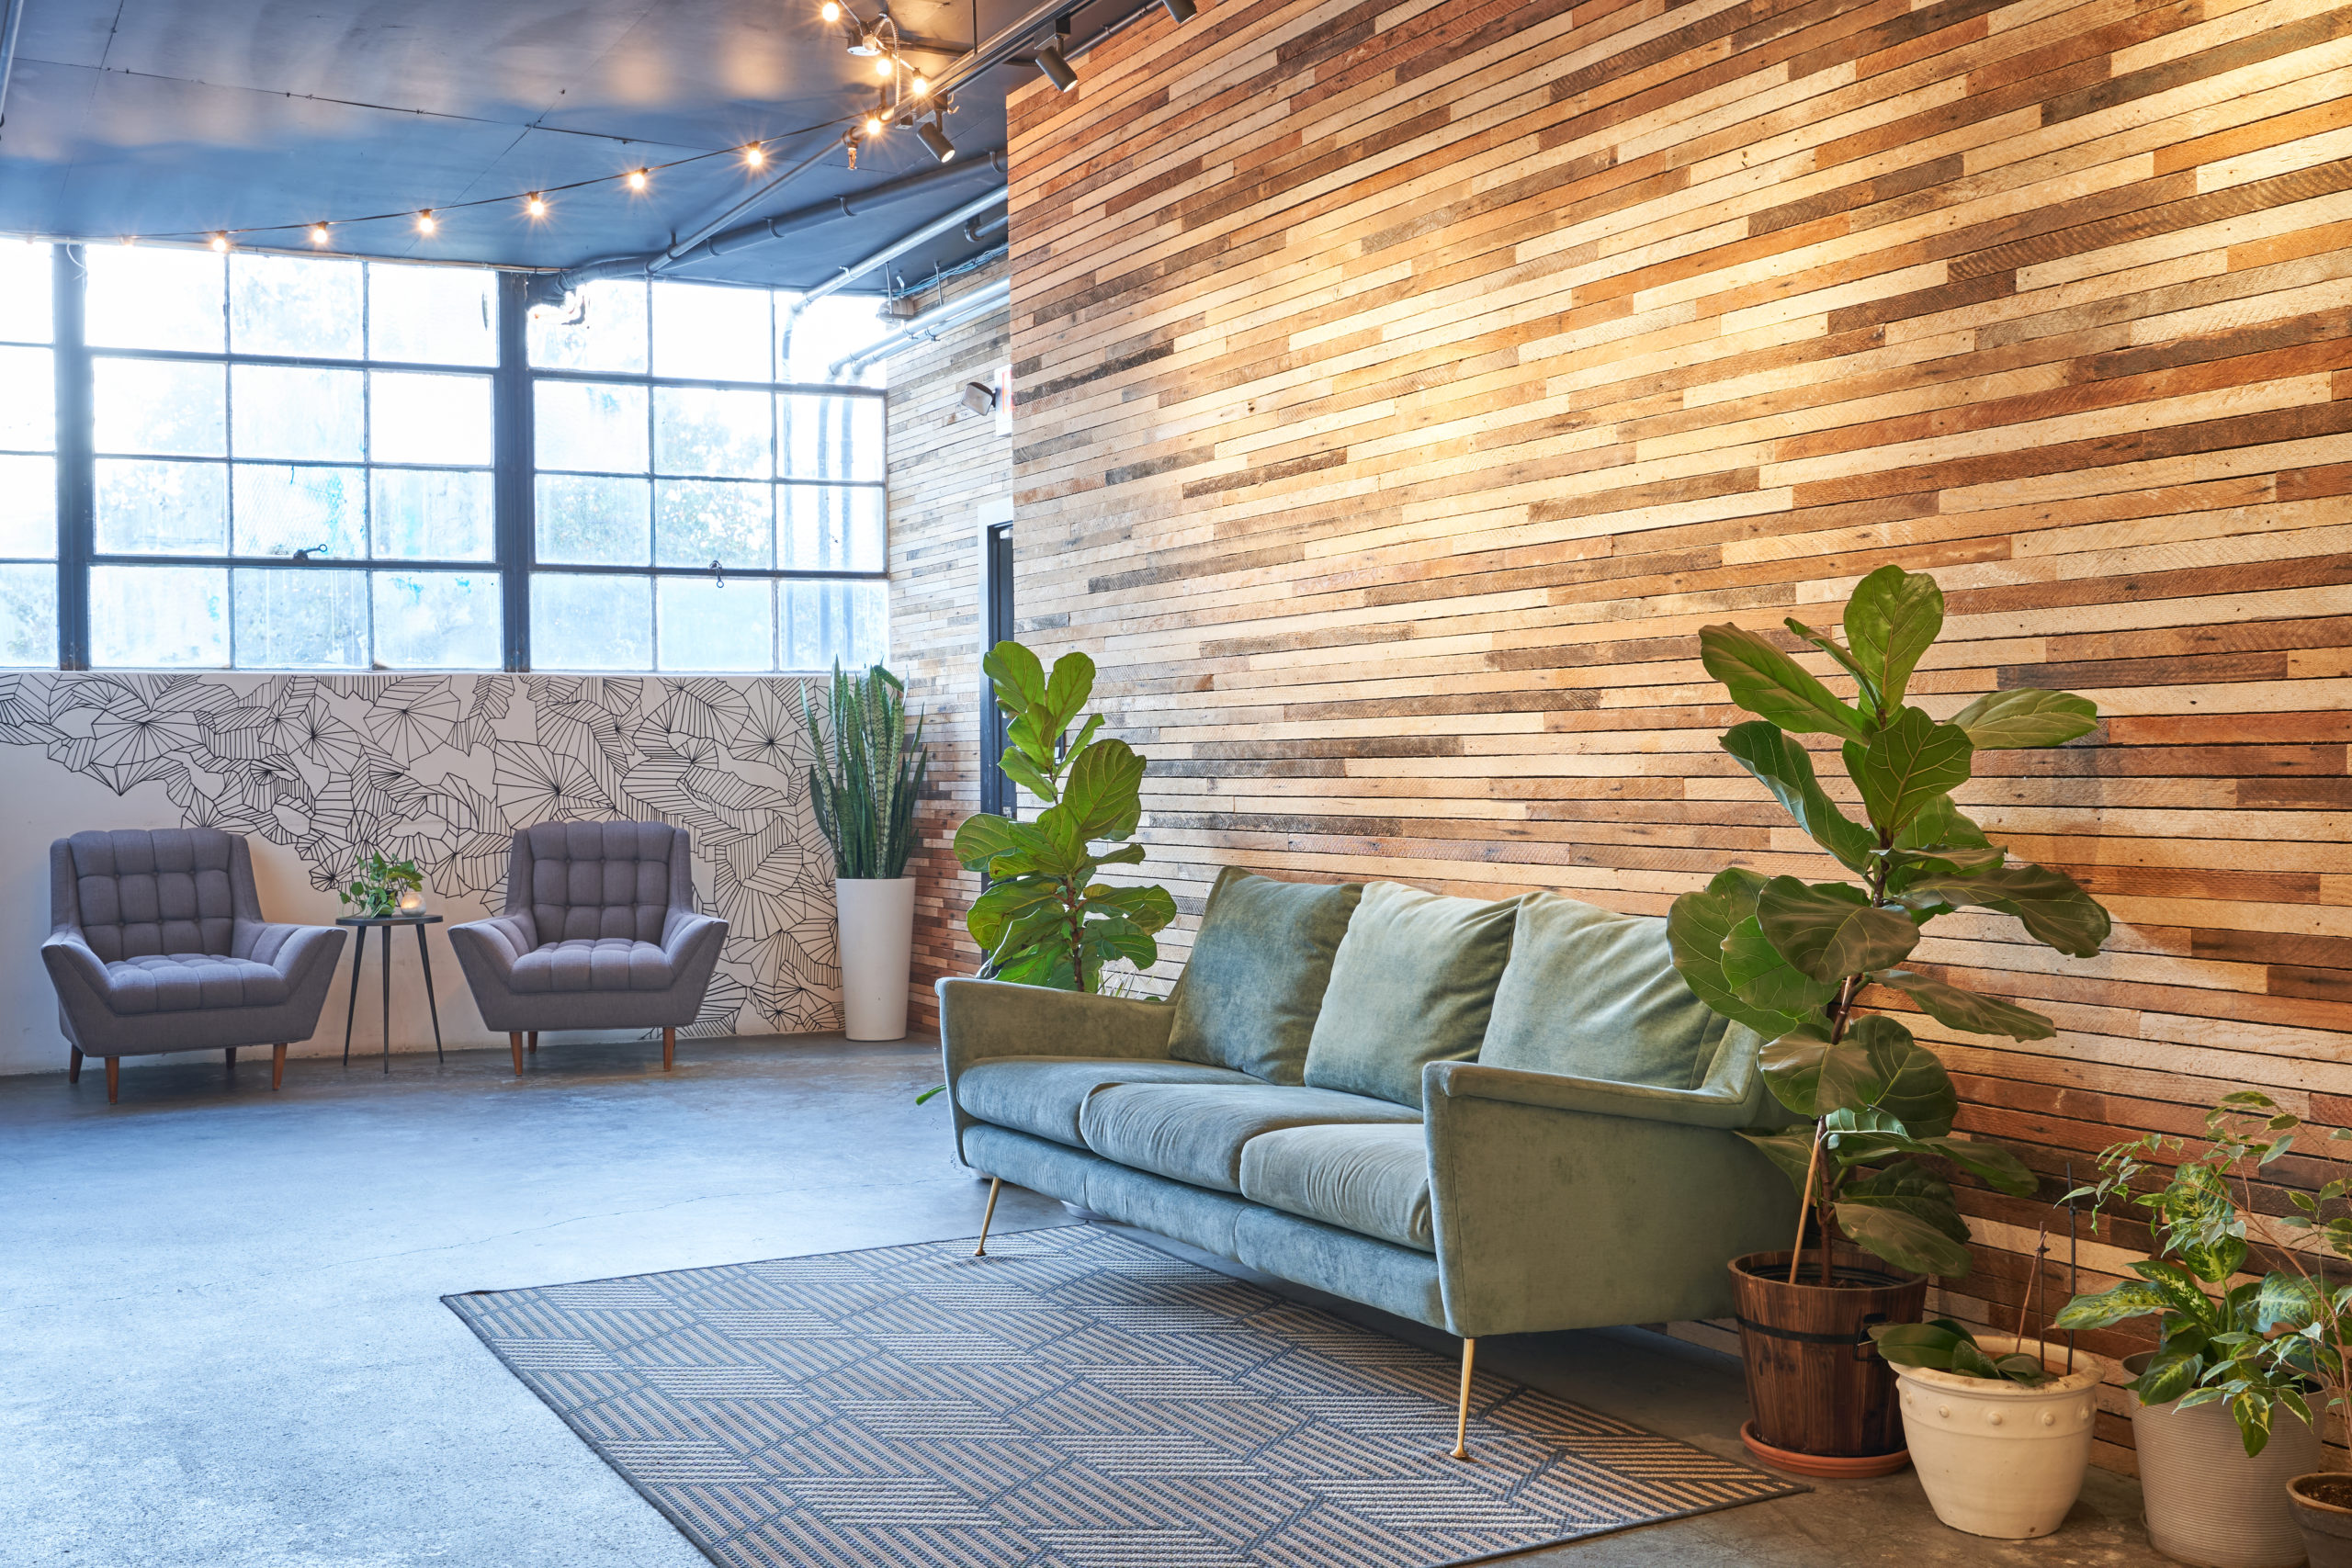 A close up shot of a green sofa that is flanked by two standing plants and that is set against a wood paneled wall. There are also two chairs against a wall with windows in the best shared offices Berkeley has right now.